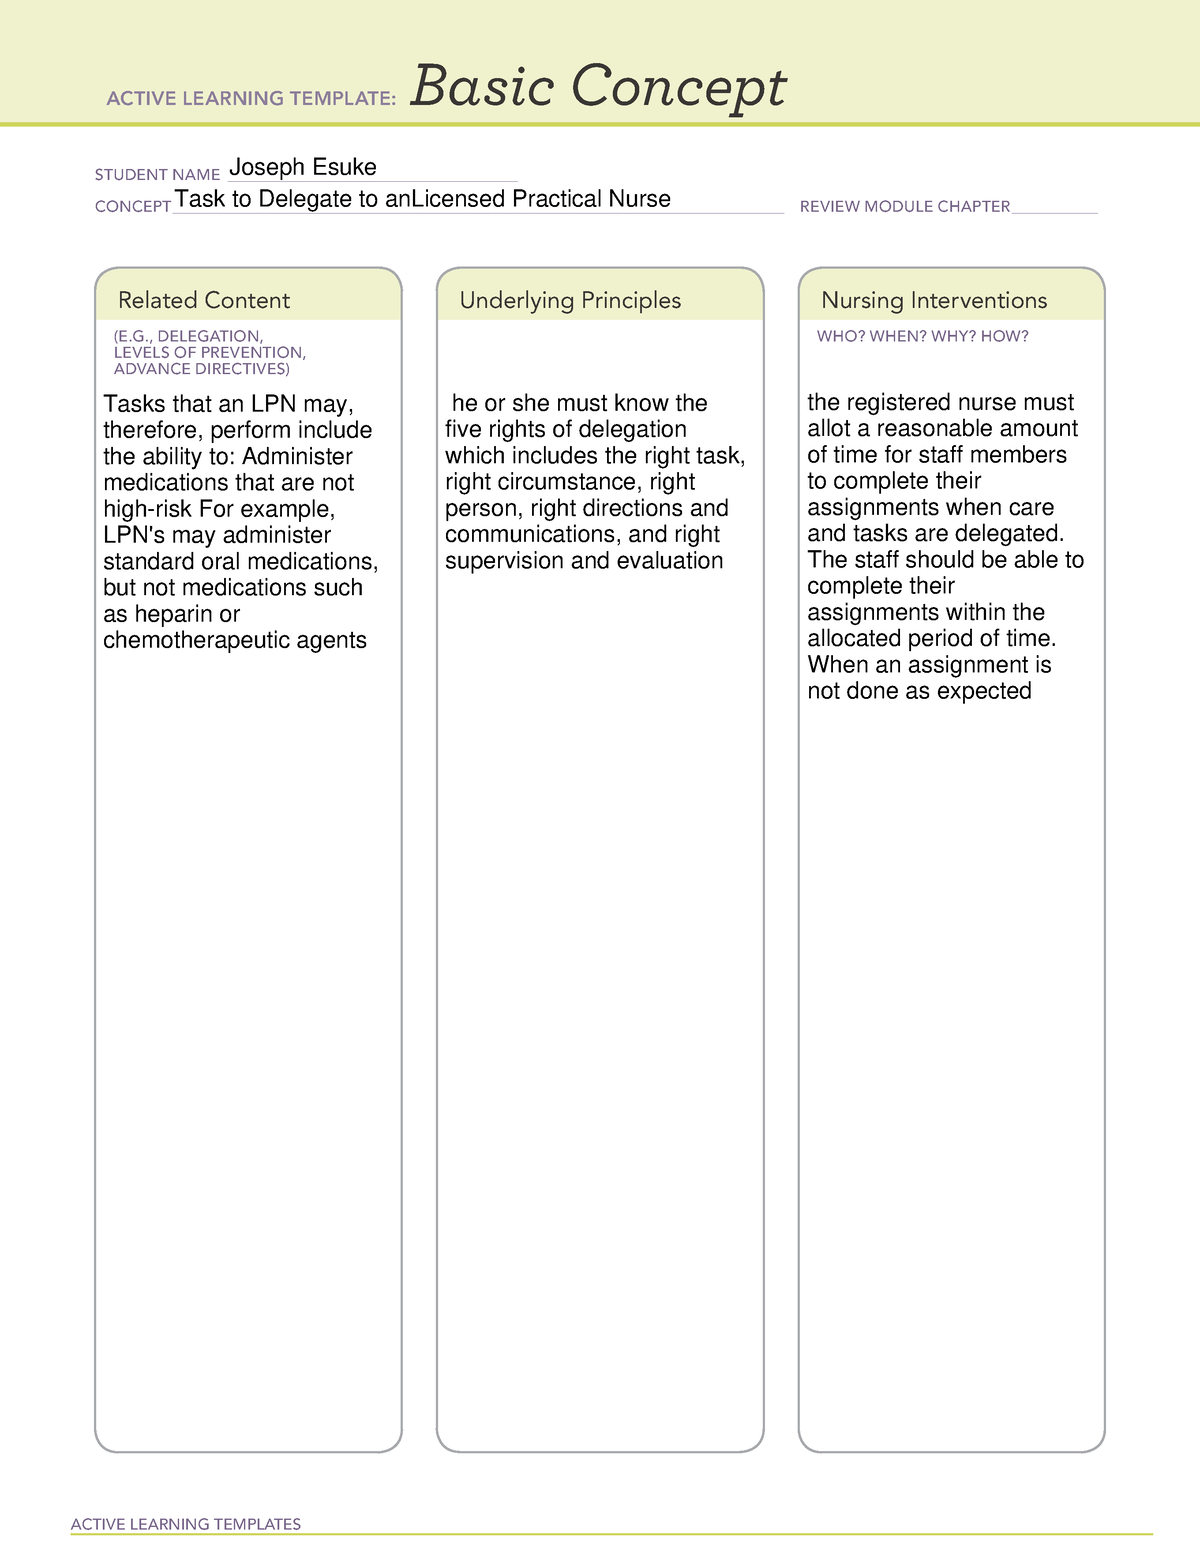 Basic Concept Template ACTIVE LEARNING TEMPLATES Basic Concept